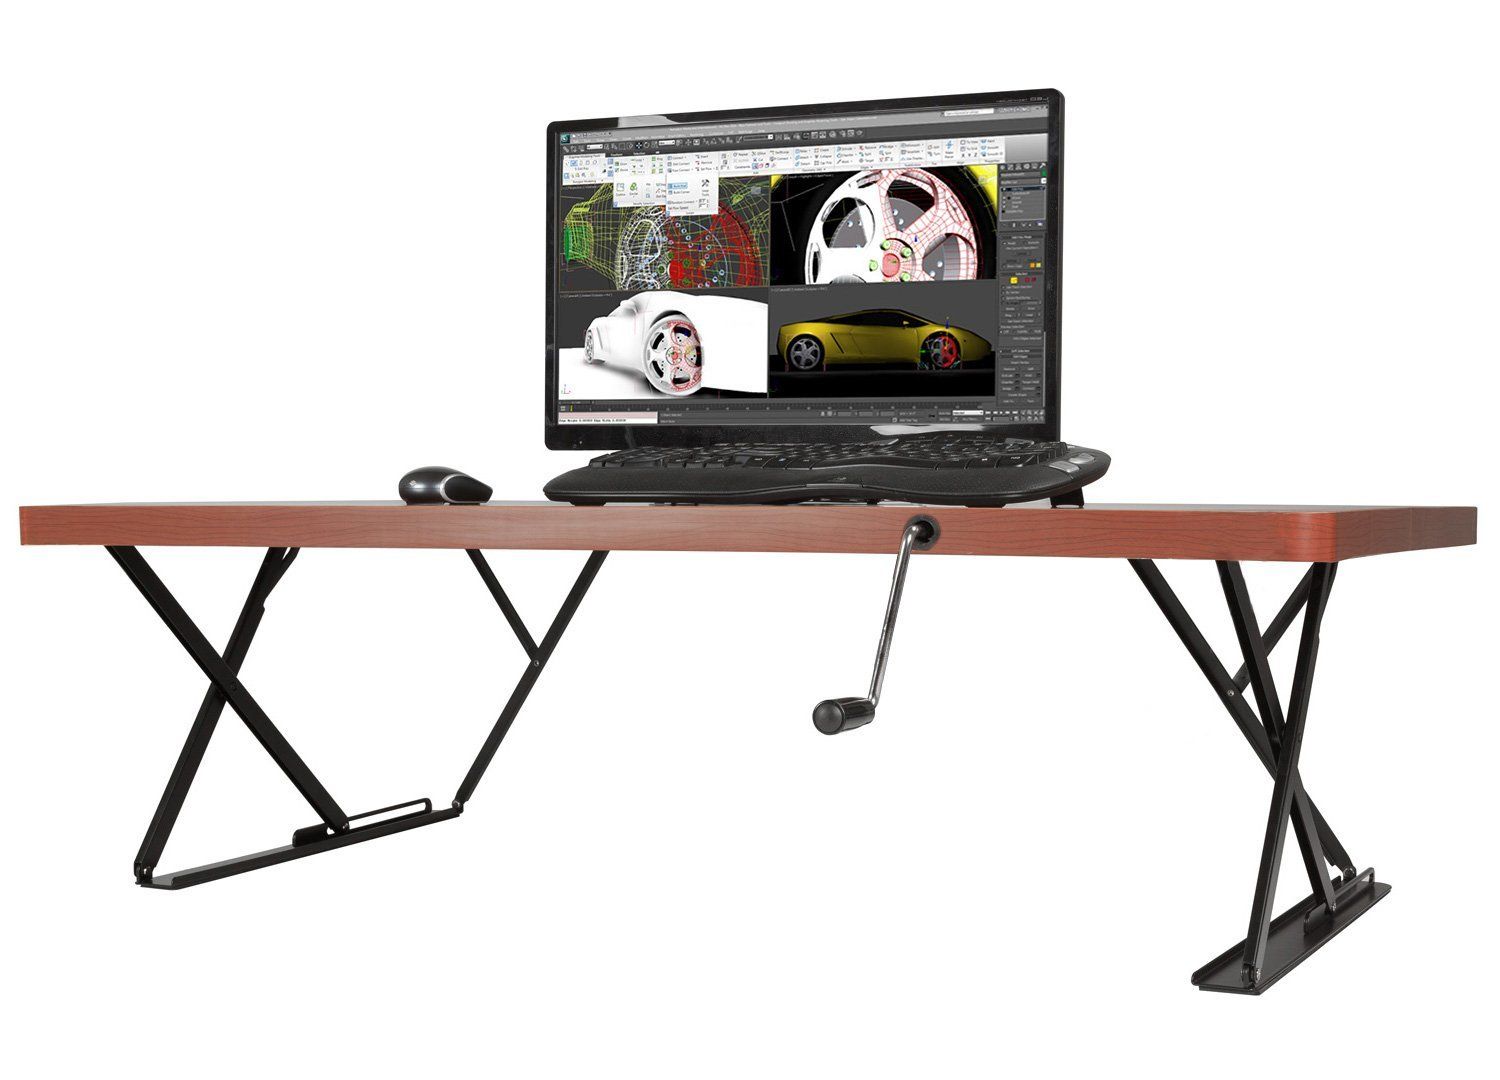 Manual Adjustable Height Table Top Sit / Stand Desk Cherry Pertaining To Cherry Adjustable Stand Up Desks (View 9 of 15)